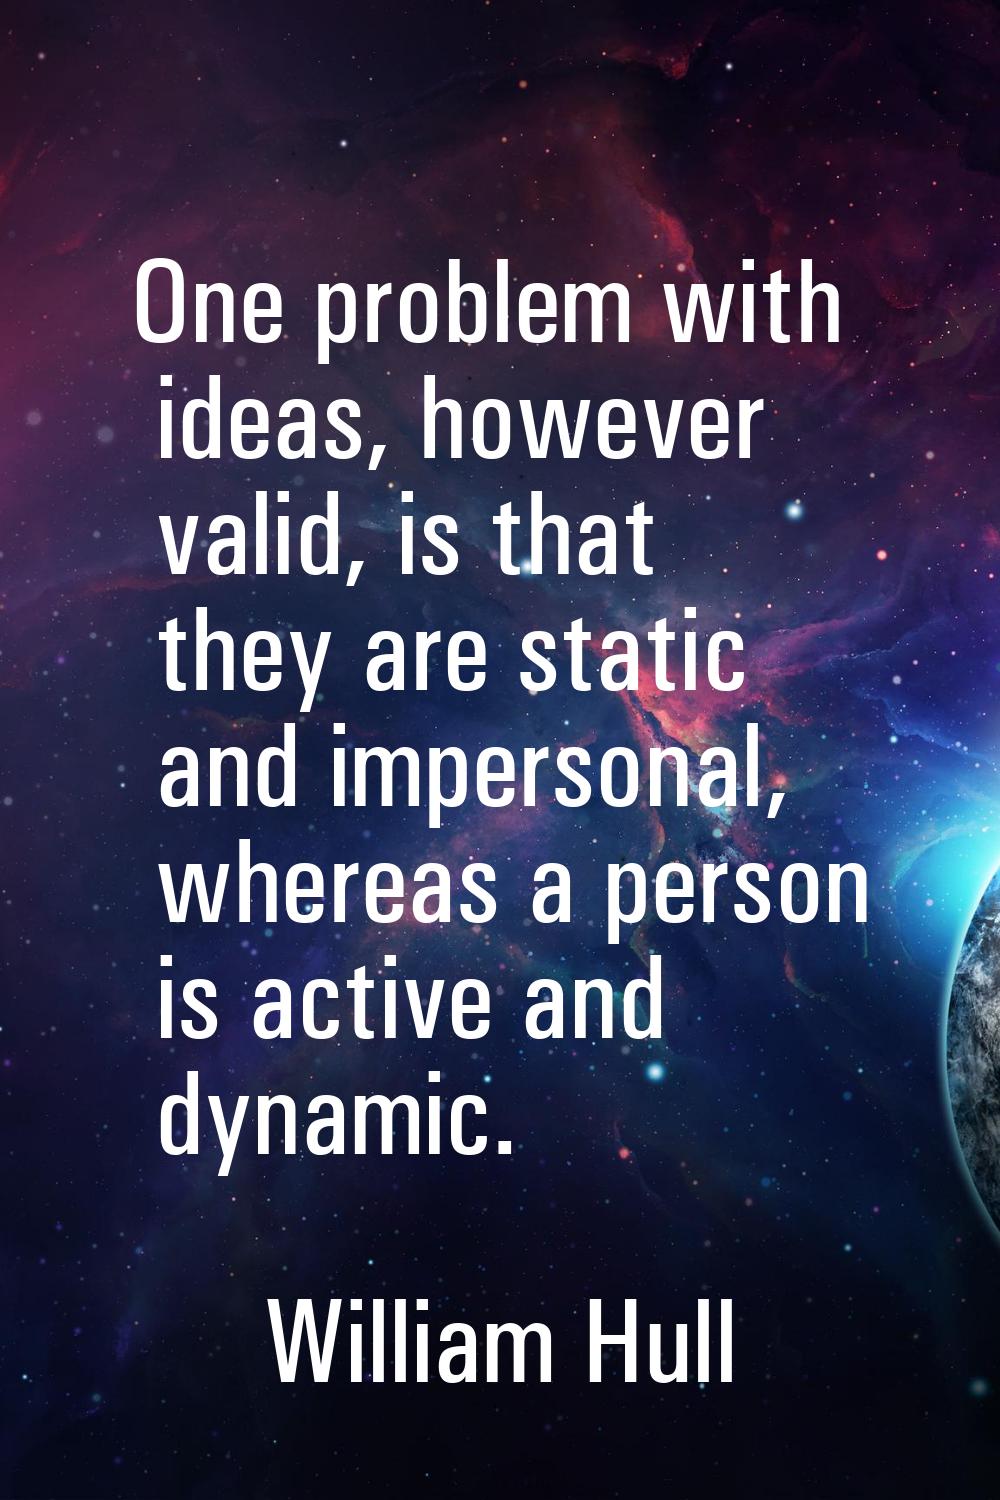 One problem with ideas, however valid, is that they are static and impersonal, whereas a person is 